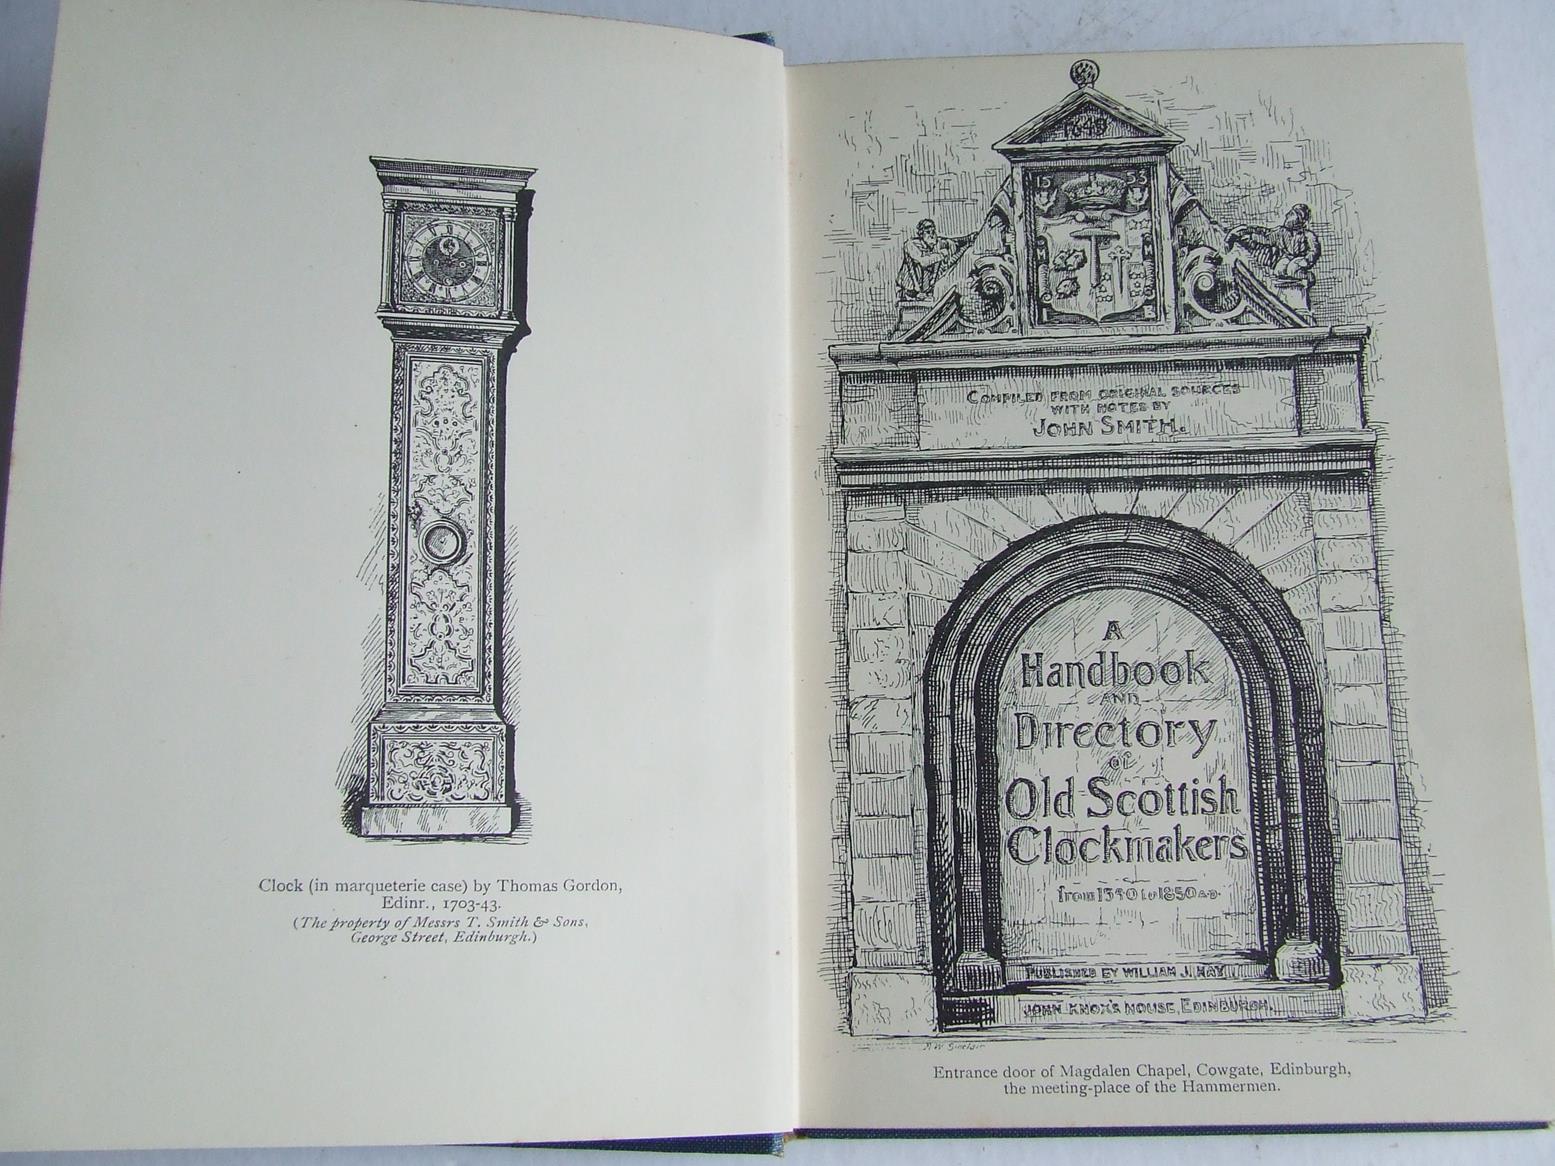 A Handbook and Directory of Old Scottish Clockmakers from 1540 to 1850